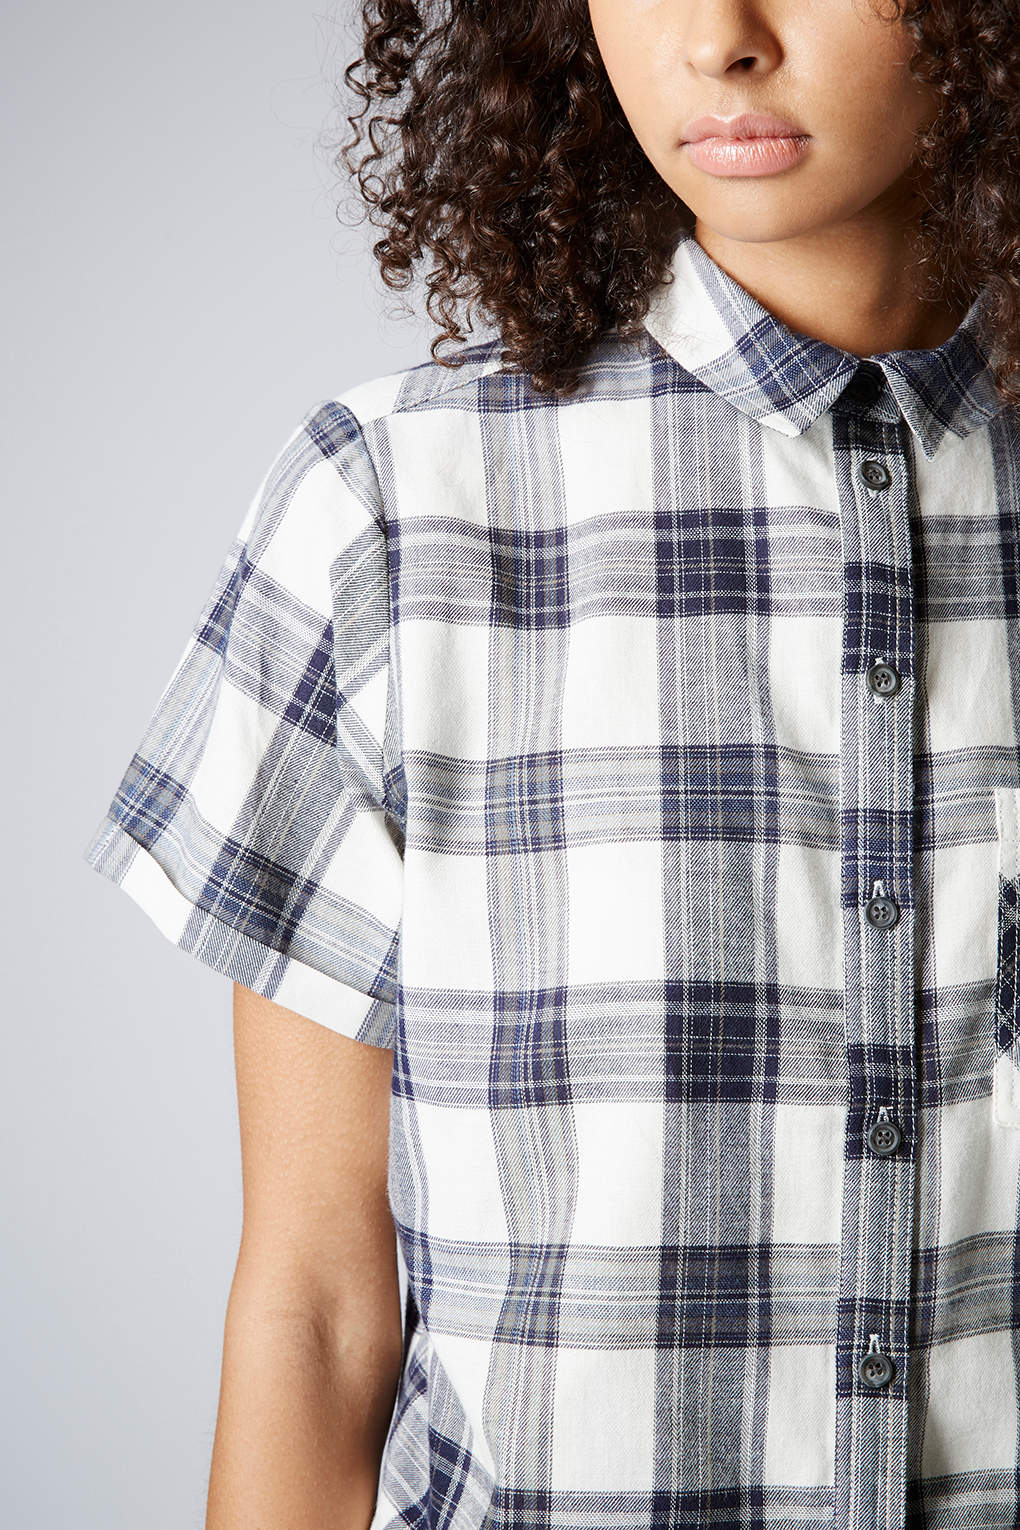 Lyst - Topshop Short Sleeve Check Shirt in Blue